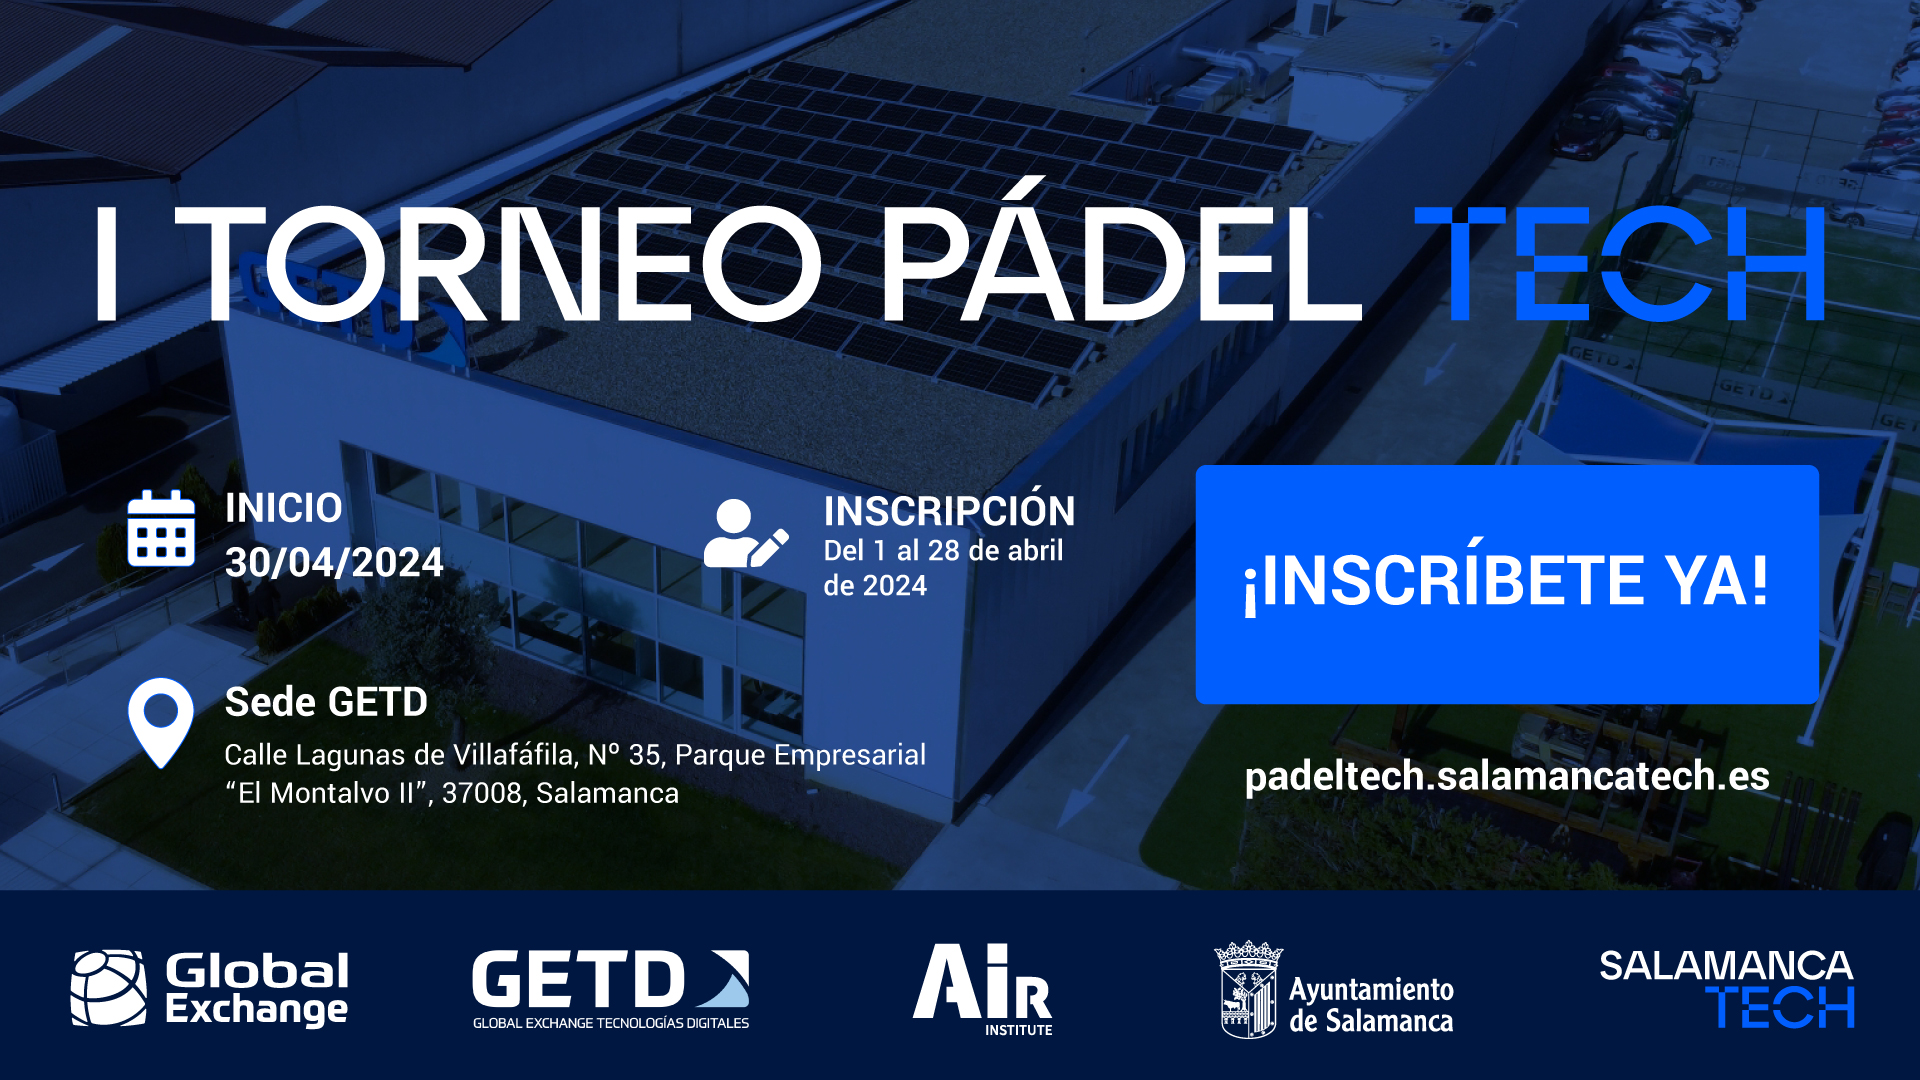 AIR Institute organises the I Padel Tech Tournament together with the Salamanca City Council and Global Exchange Tecnologías Digitales